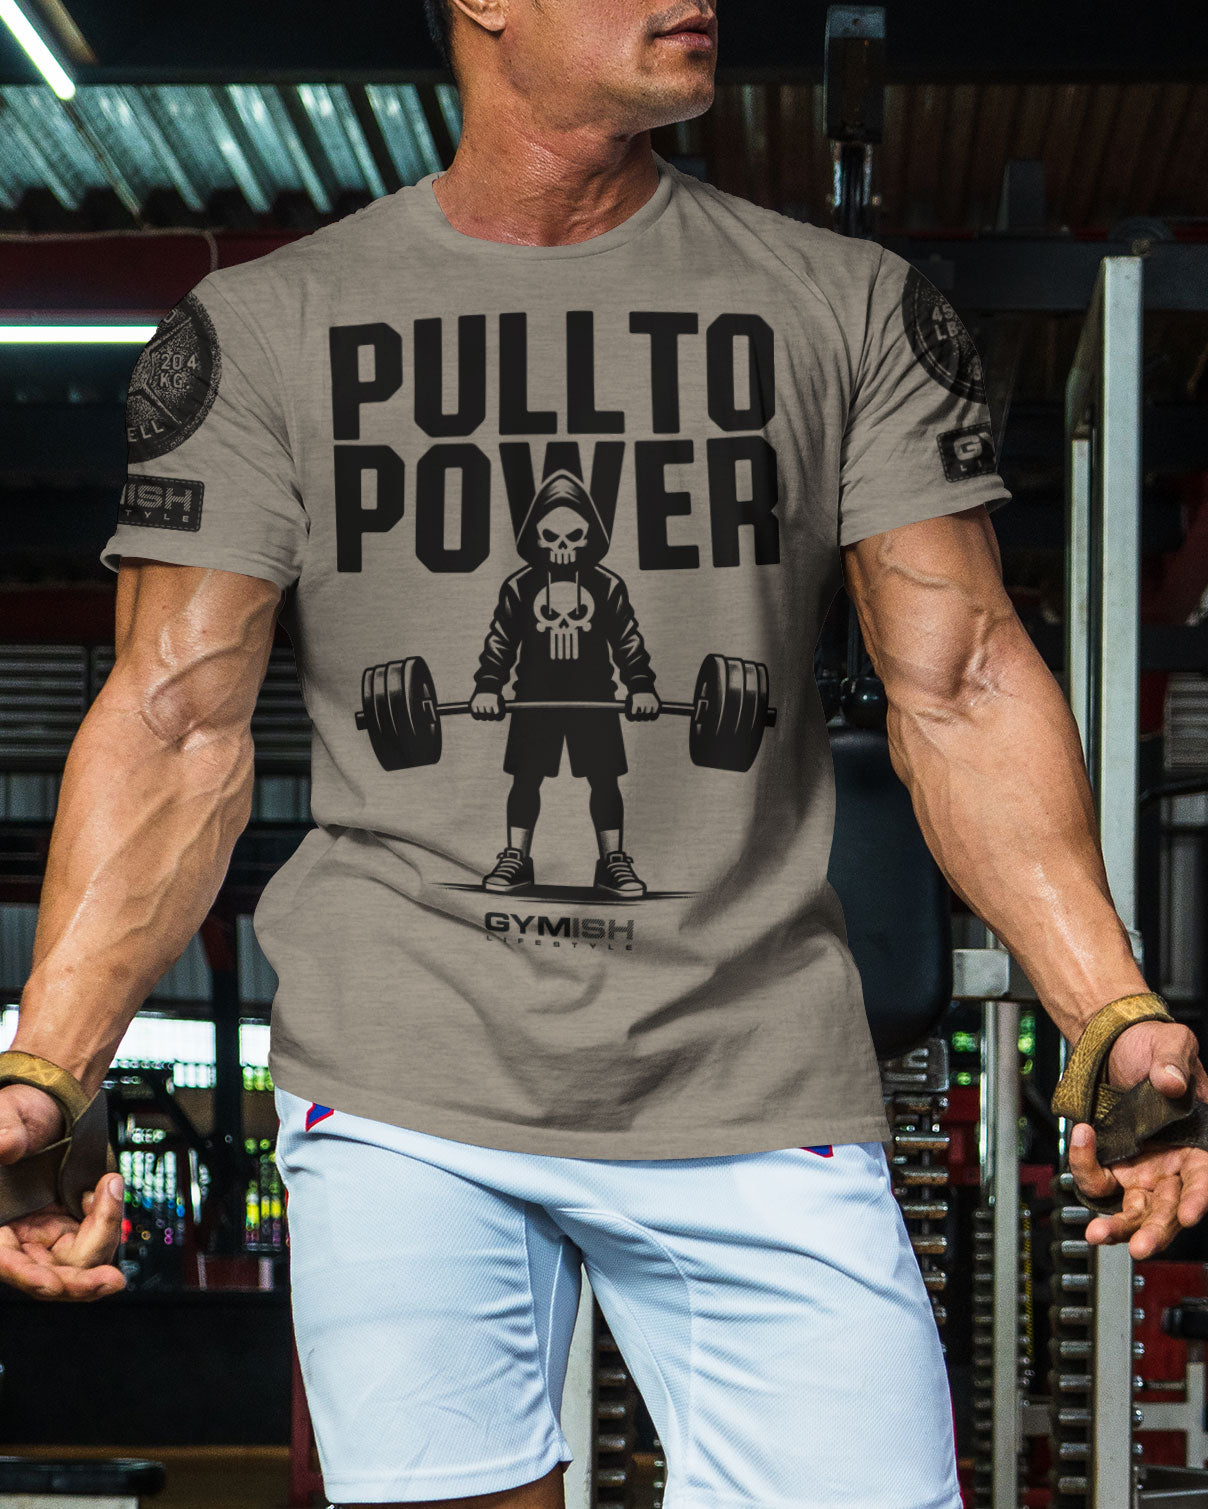 096-PULL TO POWER Workout Gym T-Shirt for Men